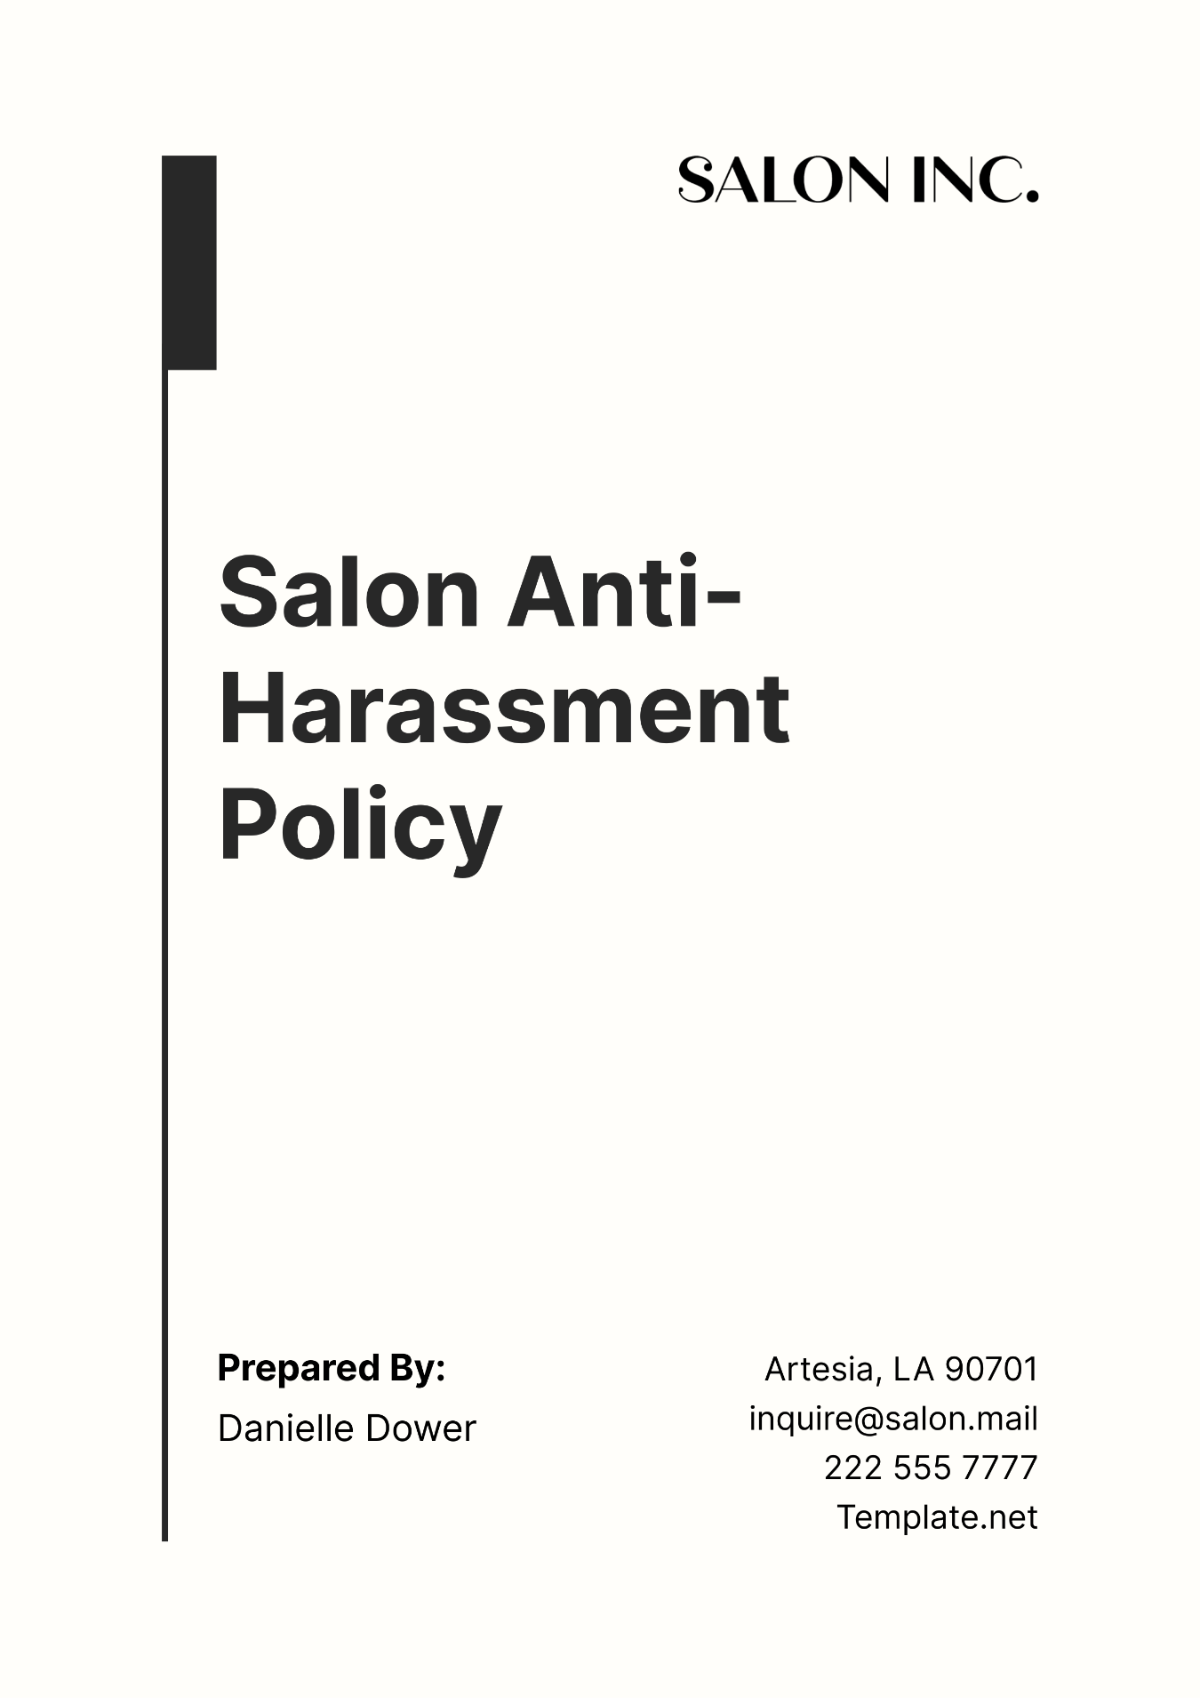 Salon Anti-Harassment Policy Template